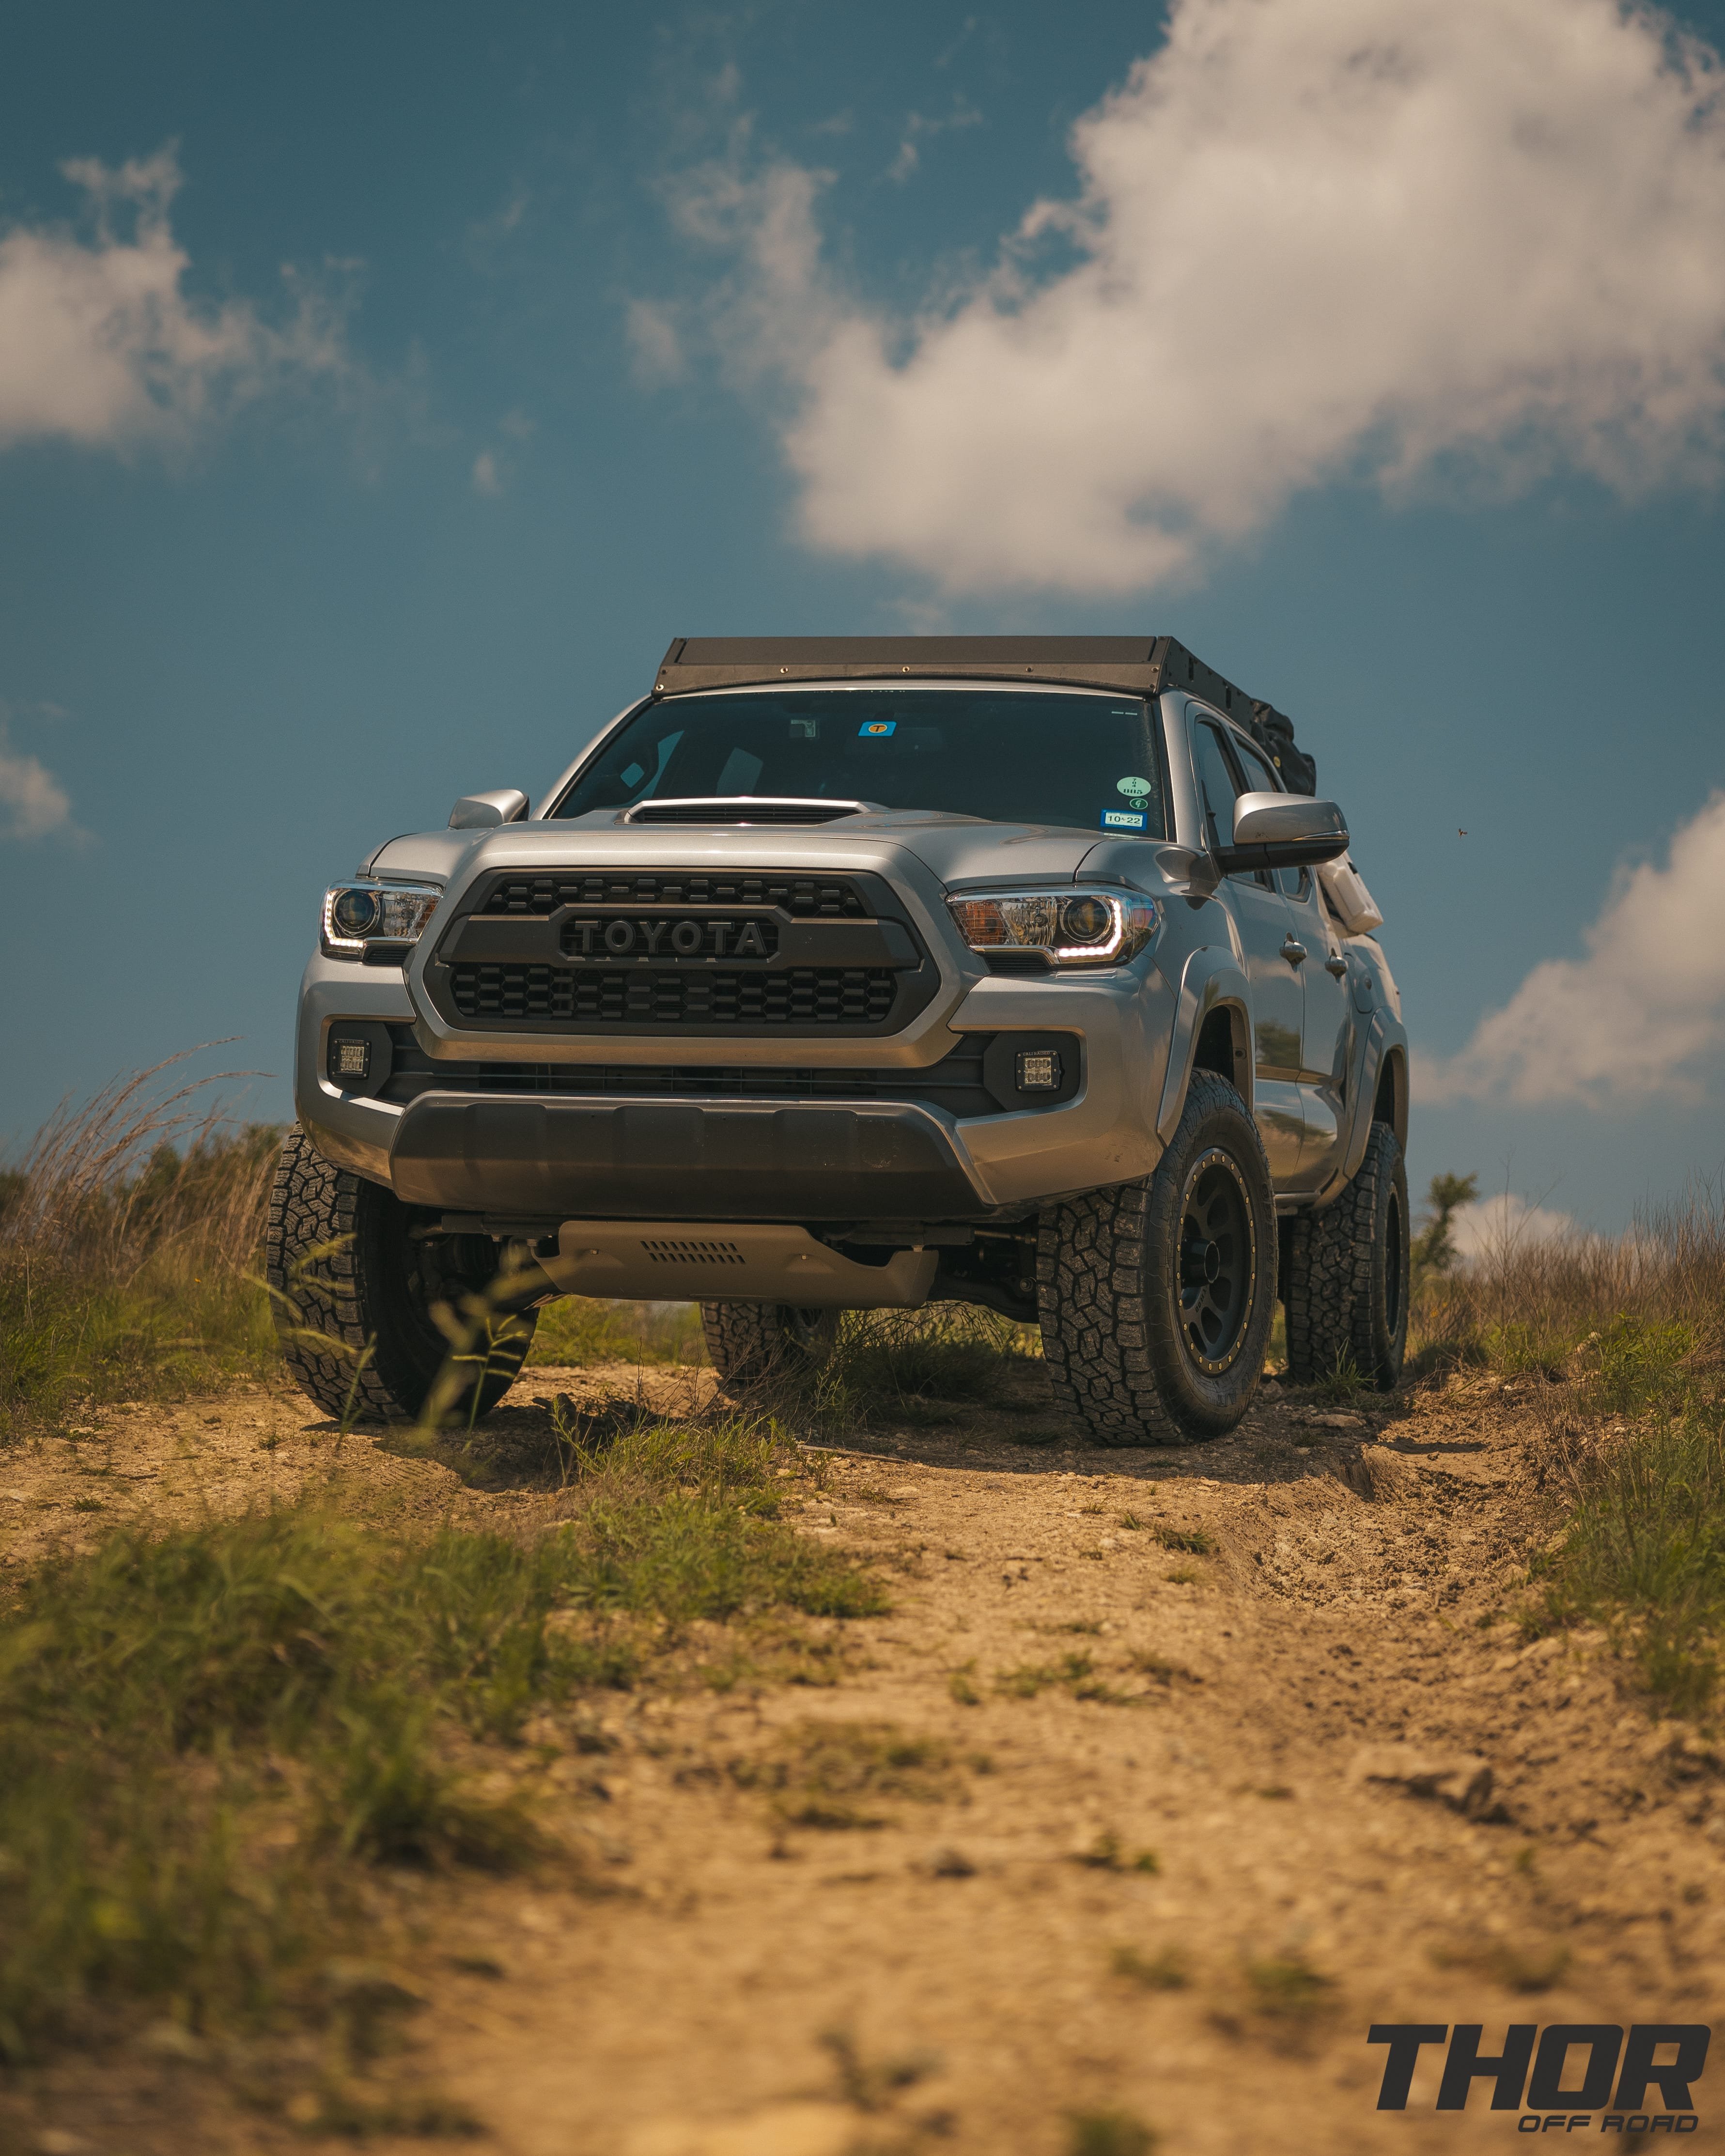 2016 Toyota Tacoma TRD Sport in Silver with 3" Icon Dynamics Stage 8 Suspension Kit, 285/70R17 Toyo Tires, 17" Method 305NV Wheels, CBI Roof Rack, Smitty Built Tent and Cover, RotoPax and MaxxTrax, Rigid Fog Light Kit